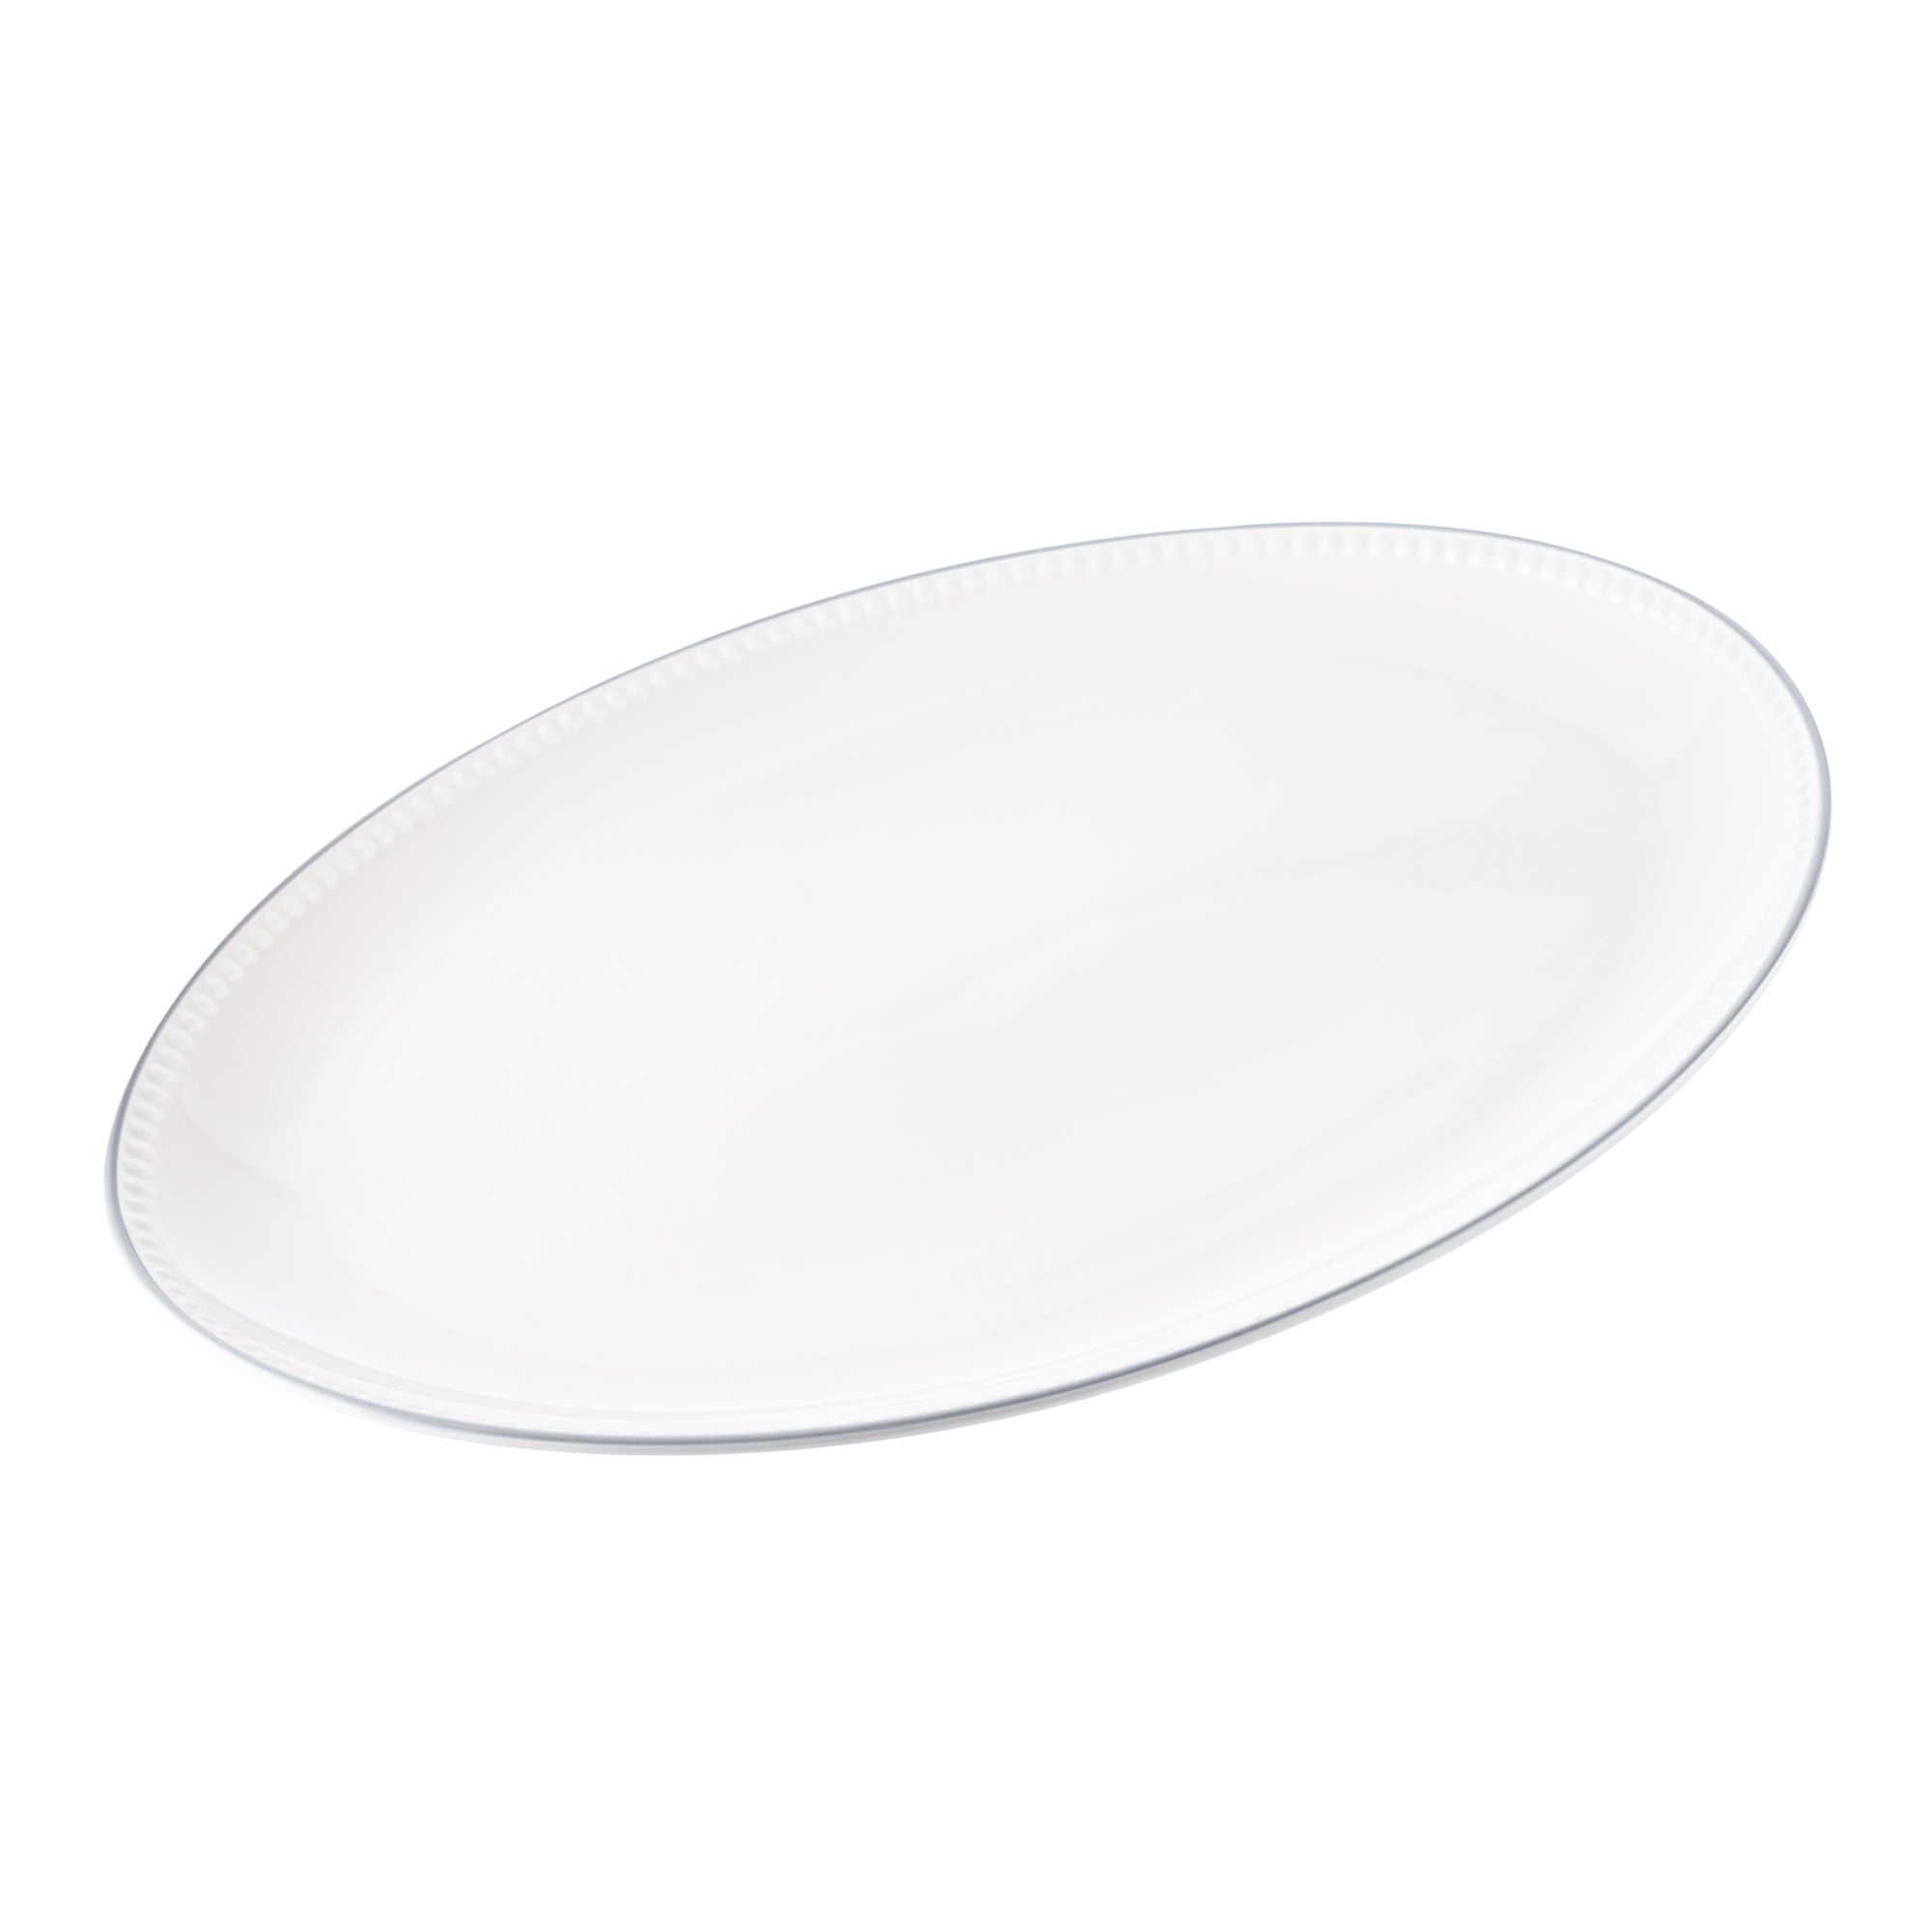 MARY BERRY SIGNATURE LARGE OVAL SERVING PLATTER